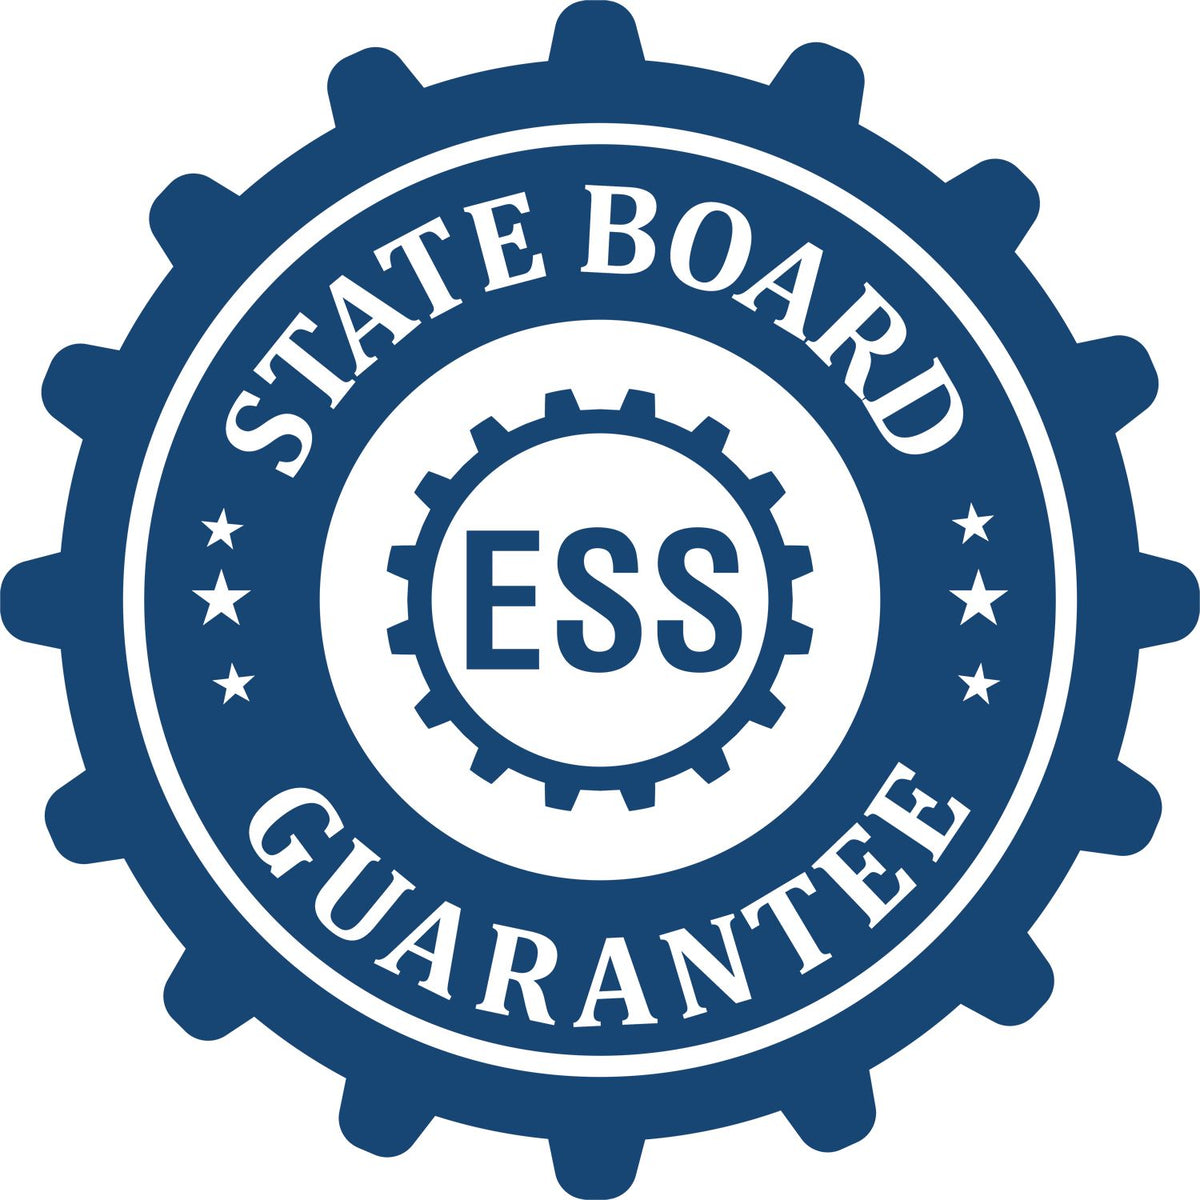 An emblem in a gear shape illustrating a state board guarantee for the Premium MaxLight Pre-Inked Washington Landscape Architectural Stamp product.